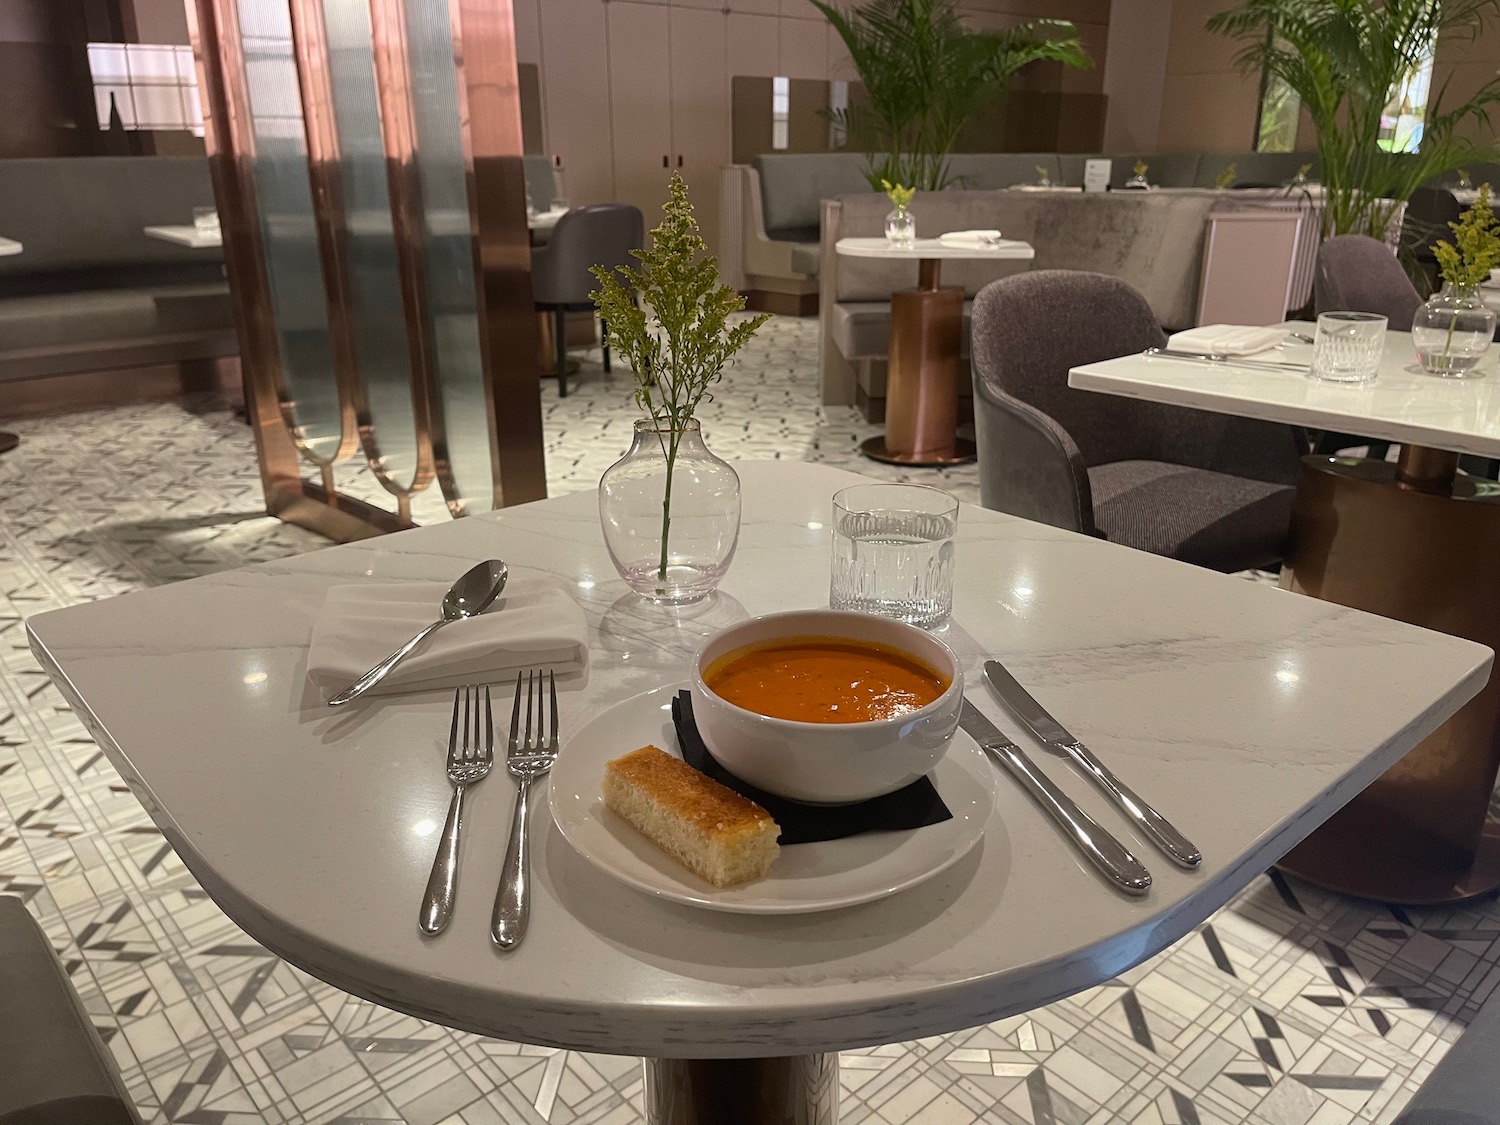 a bowl of soup on a white plate with bread and silverware on a table